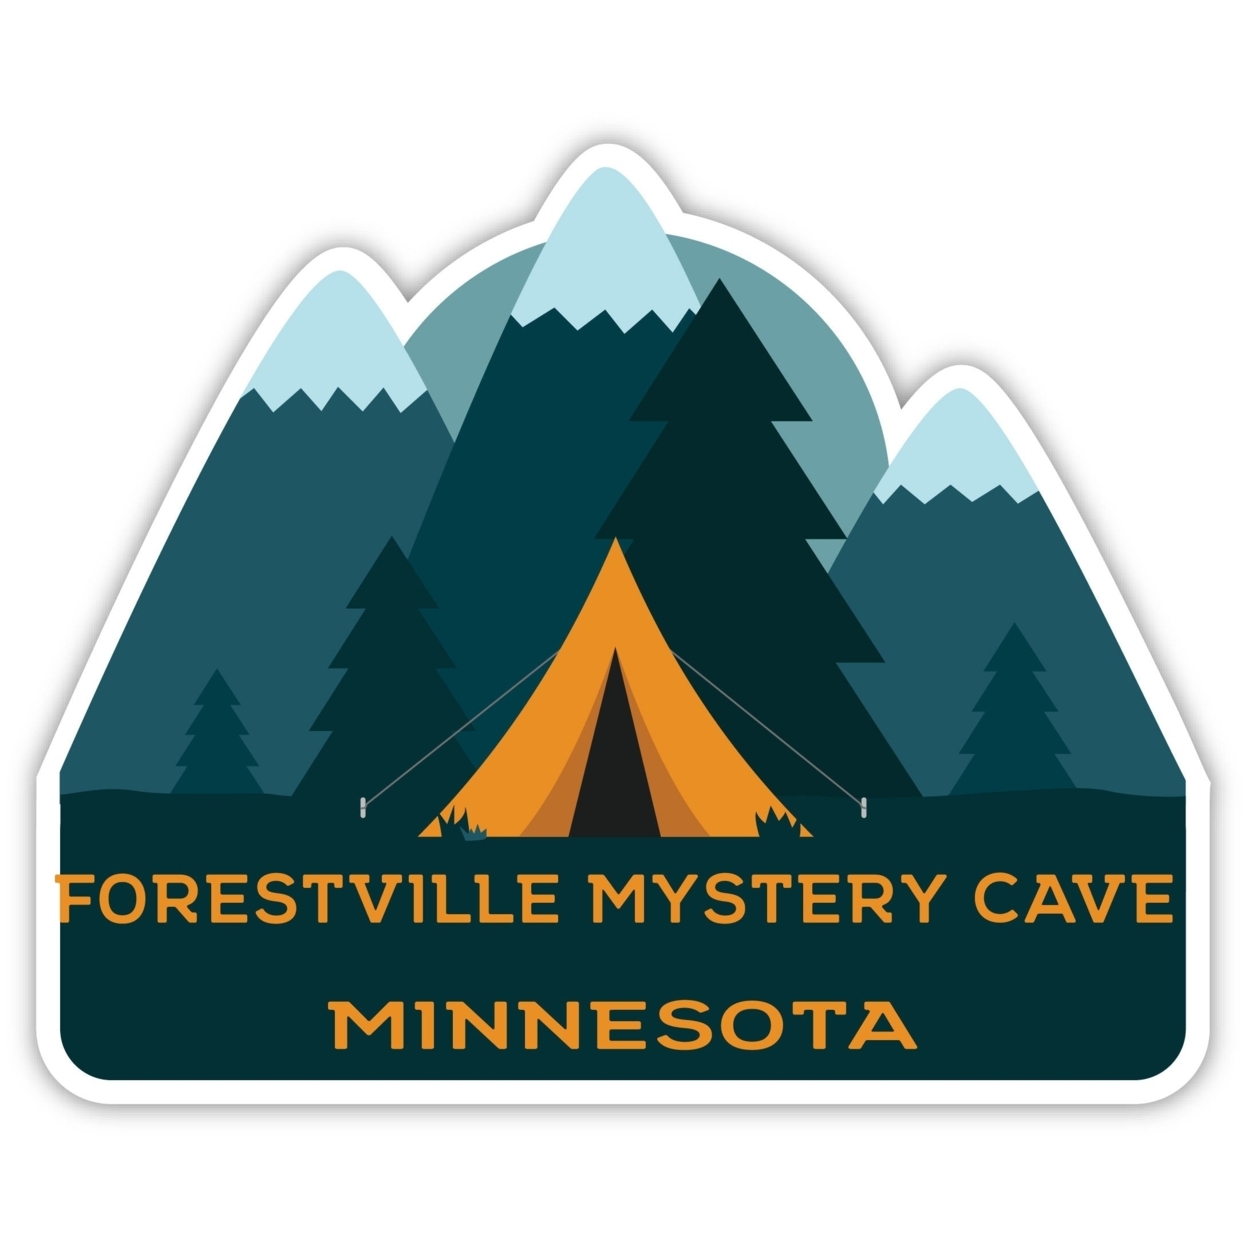 Forestville Mystery Cave Minnesota Souvenir Decorative Stickers (Choose Theme And Size) - Single Unit, 8-Inch, Tent